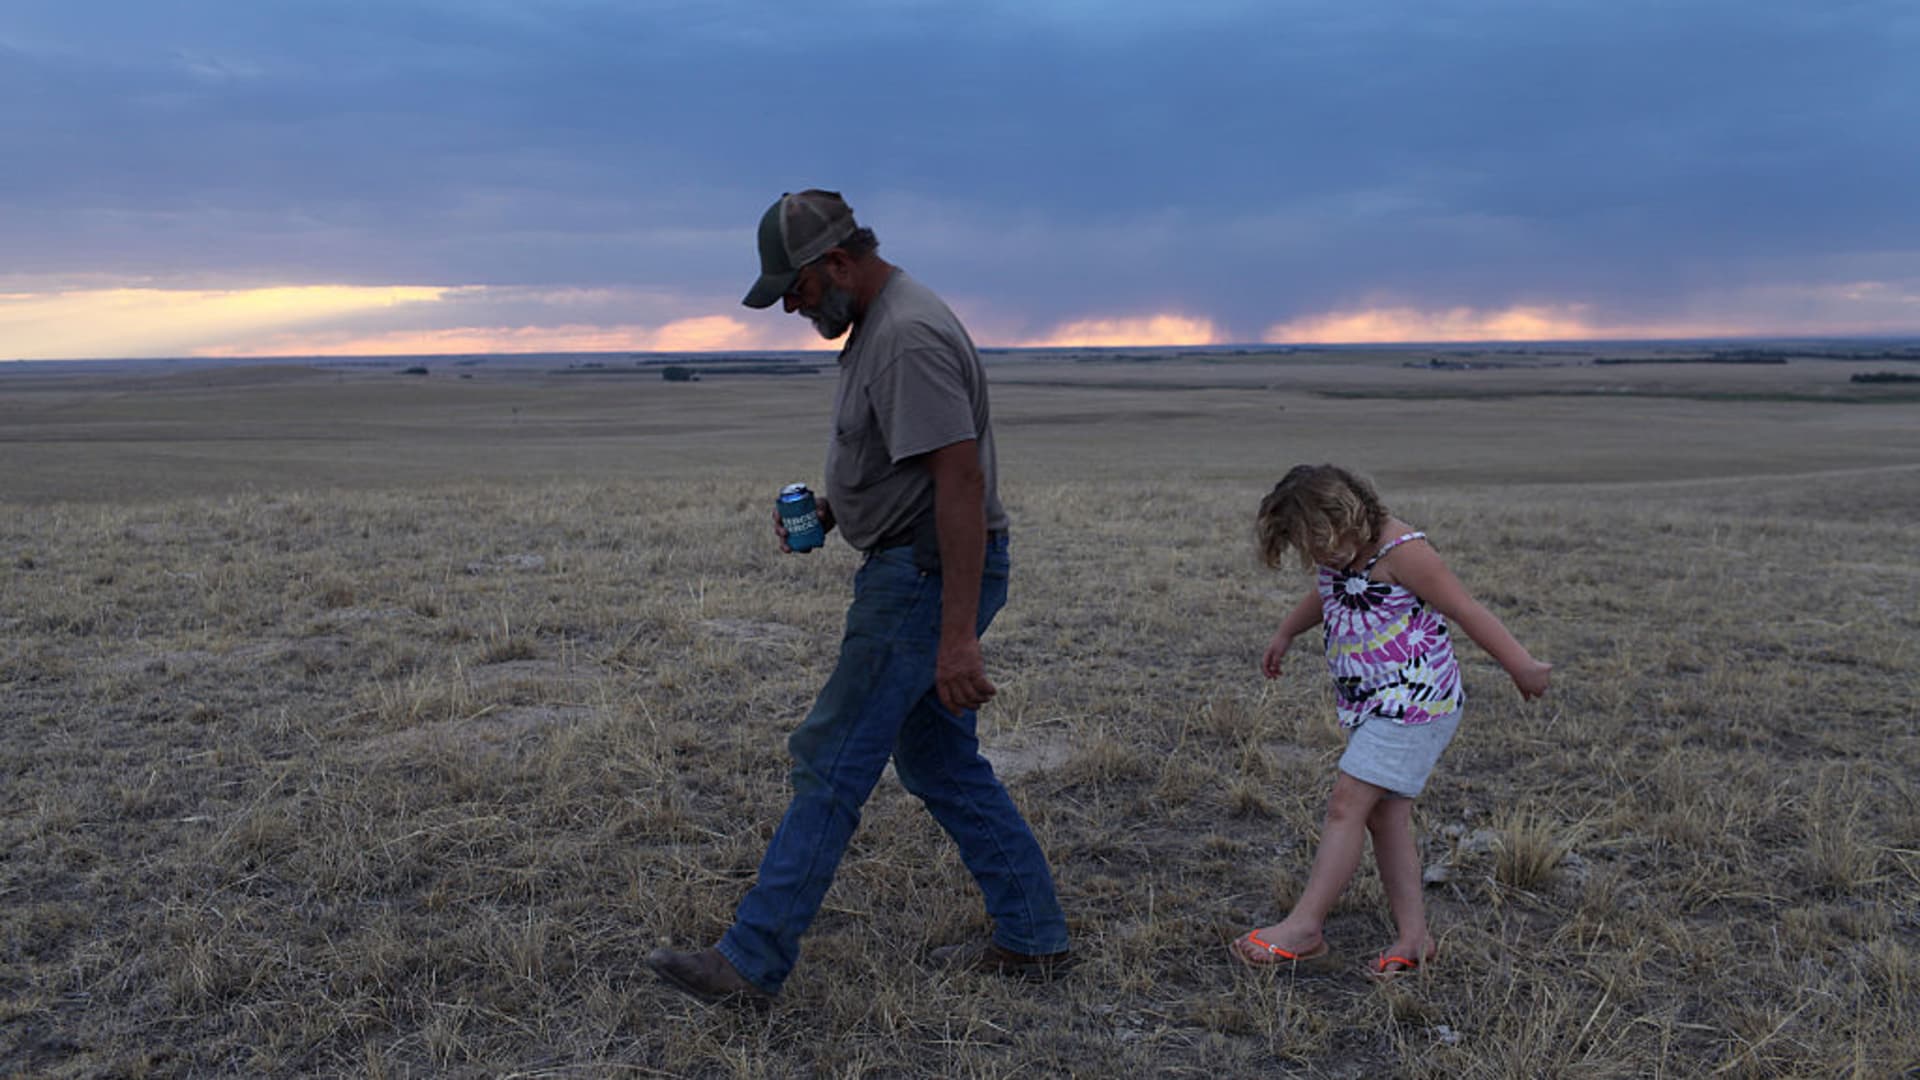 On an evening stroll, Jim Mracek leads his grandaughter across the drought stricken fields of the cattle ranch that he looks after, keeping an eye out for burrs because she is wearing sandals.